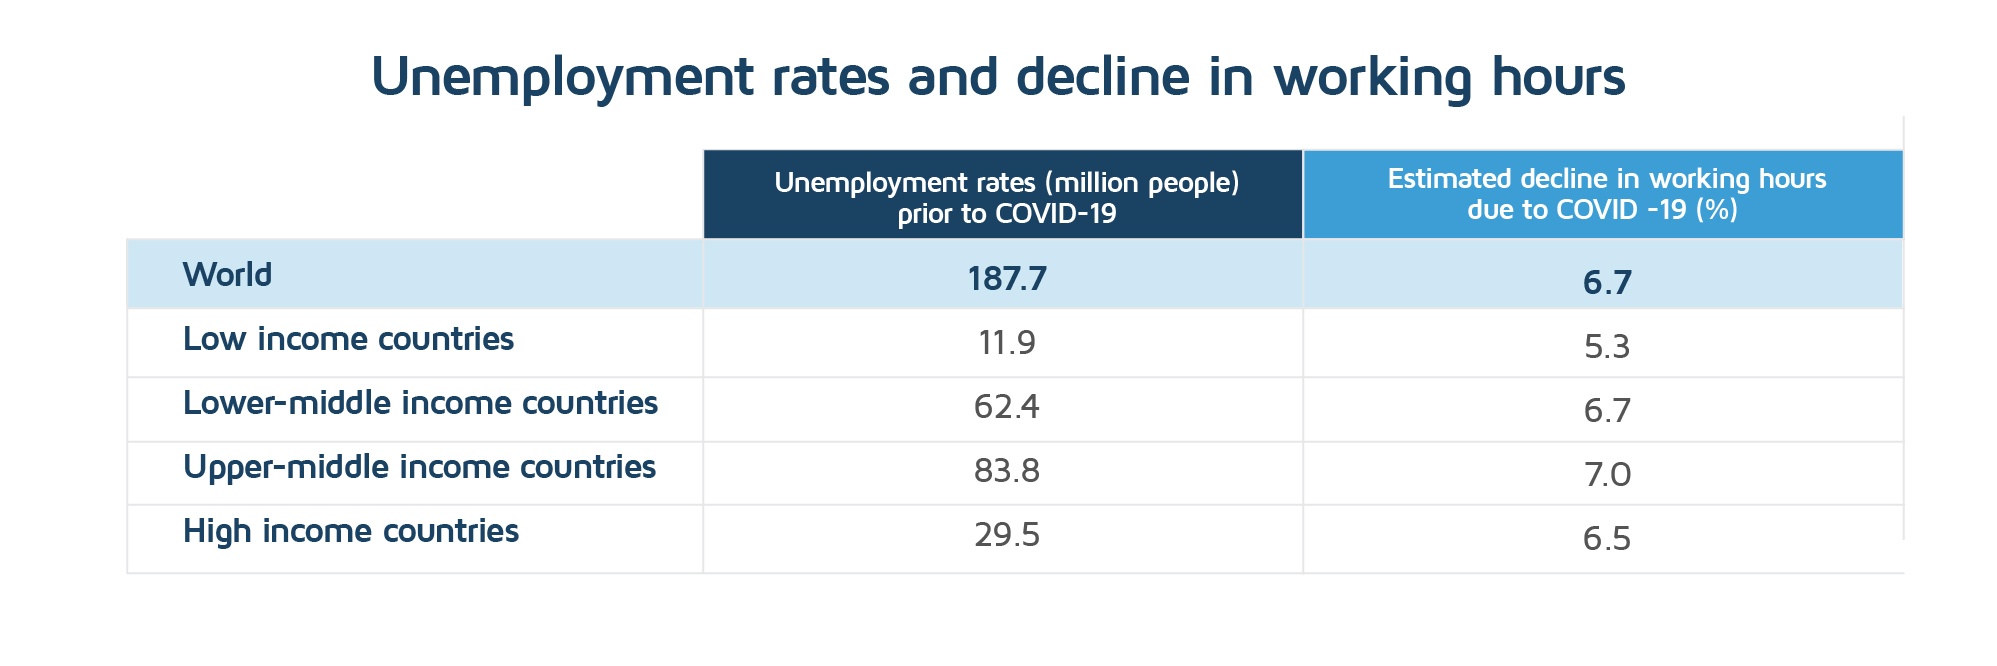 Unemployment rates and decline in working hours